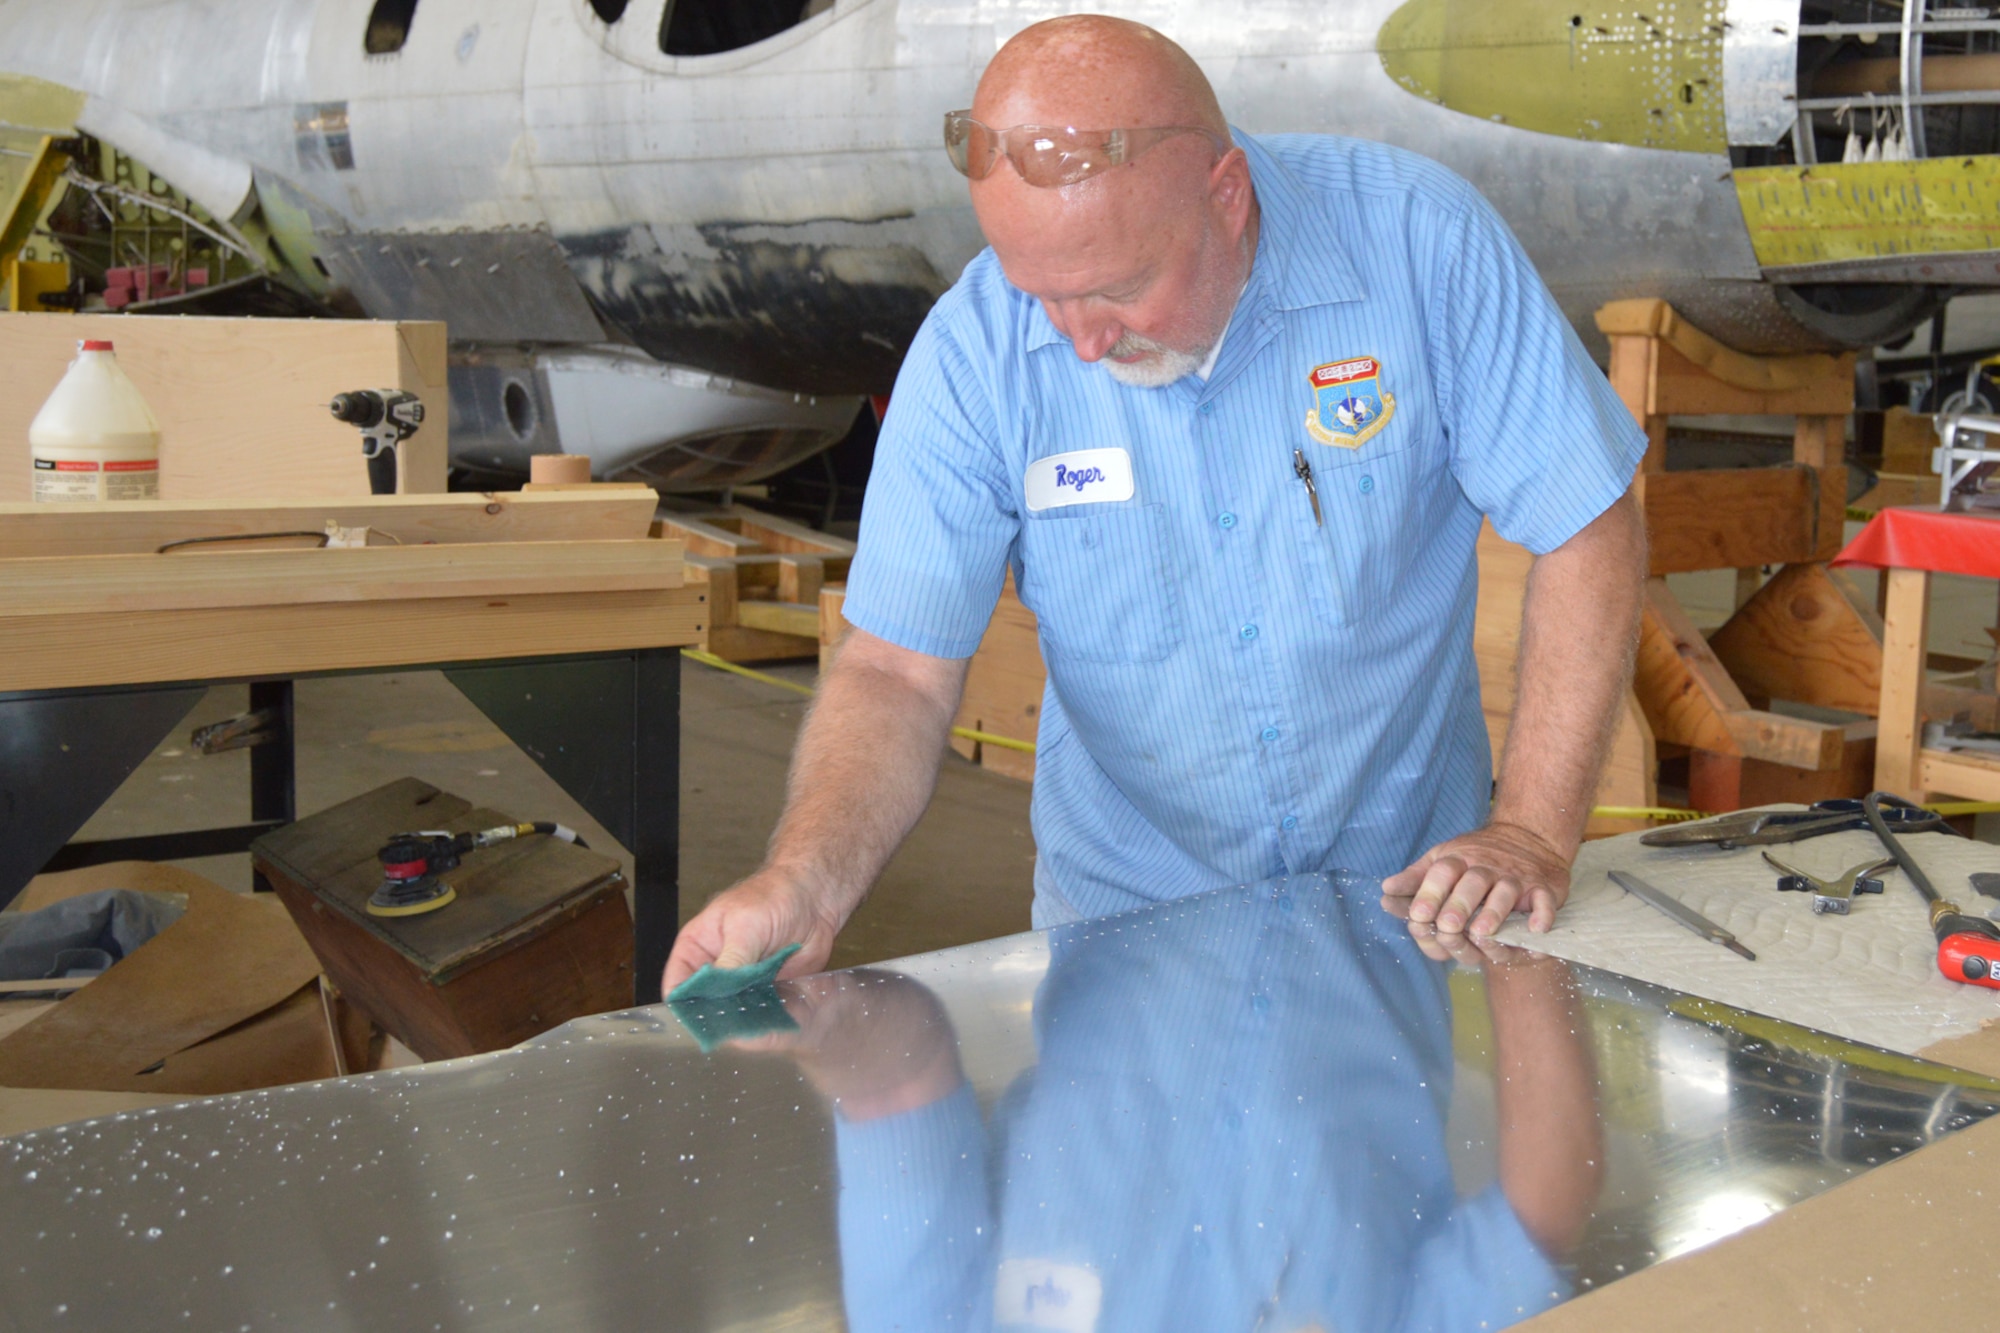 DAYTON, Ohio (08/2014) -- Restoration specialist Roger Brigner works on the B-17F "Memphis Belle" in the restoration hangar at the National Museum of the U.S. Air Force. (U.S. Air Force photo)